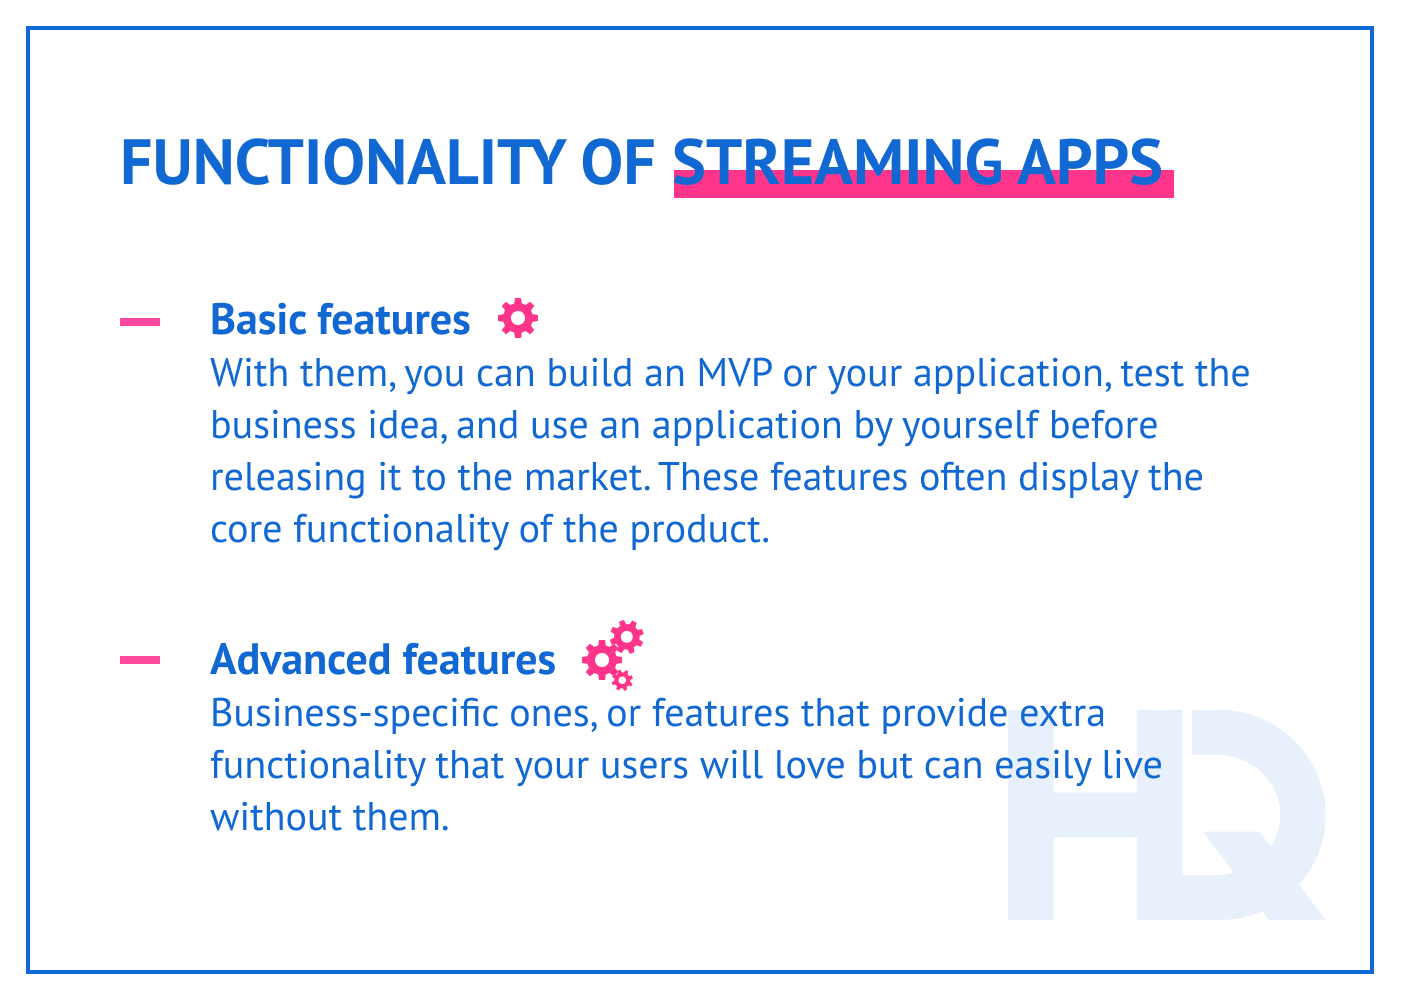 The functionality of streaming apps.